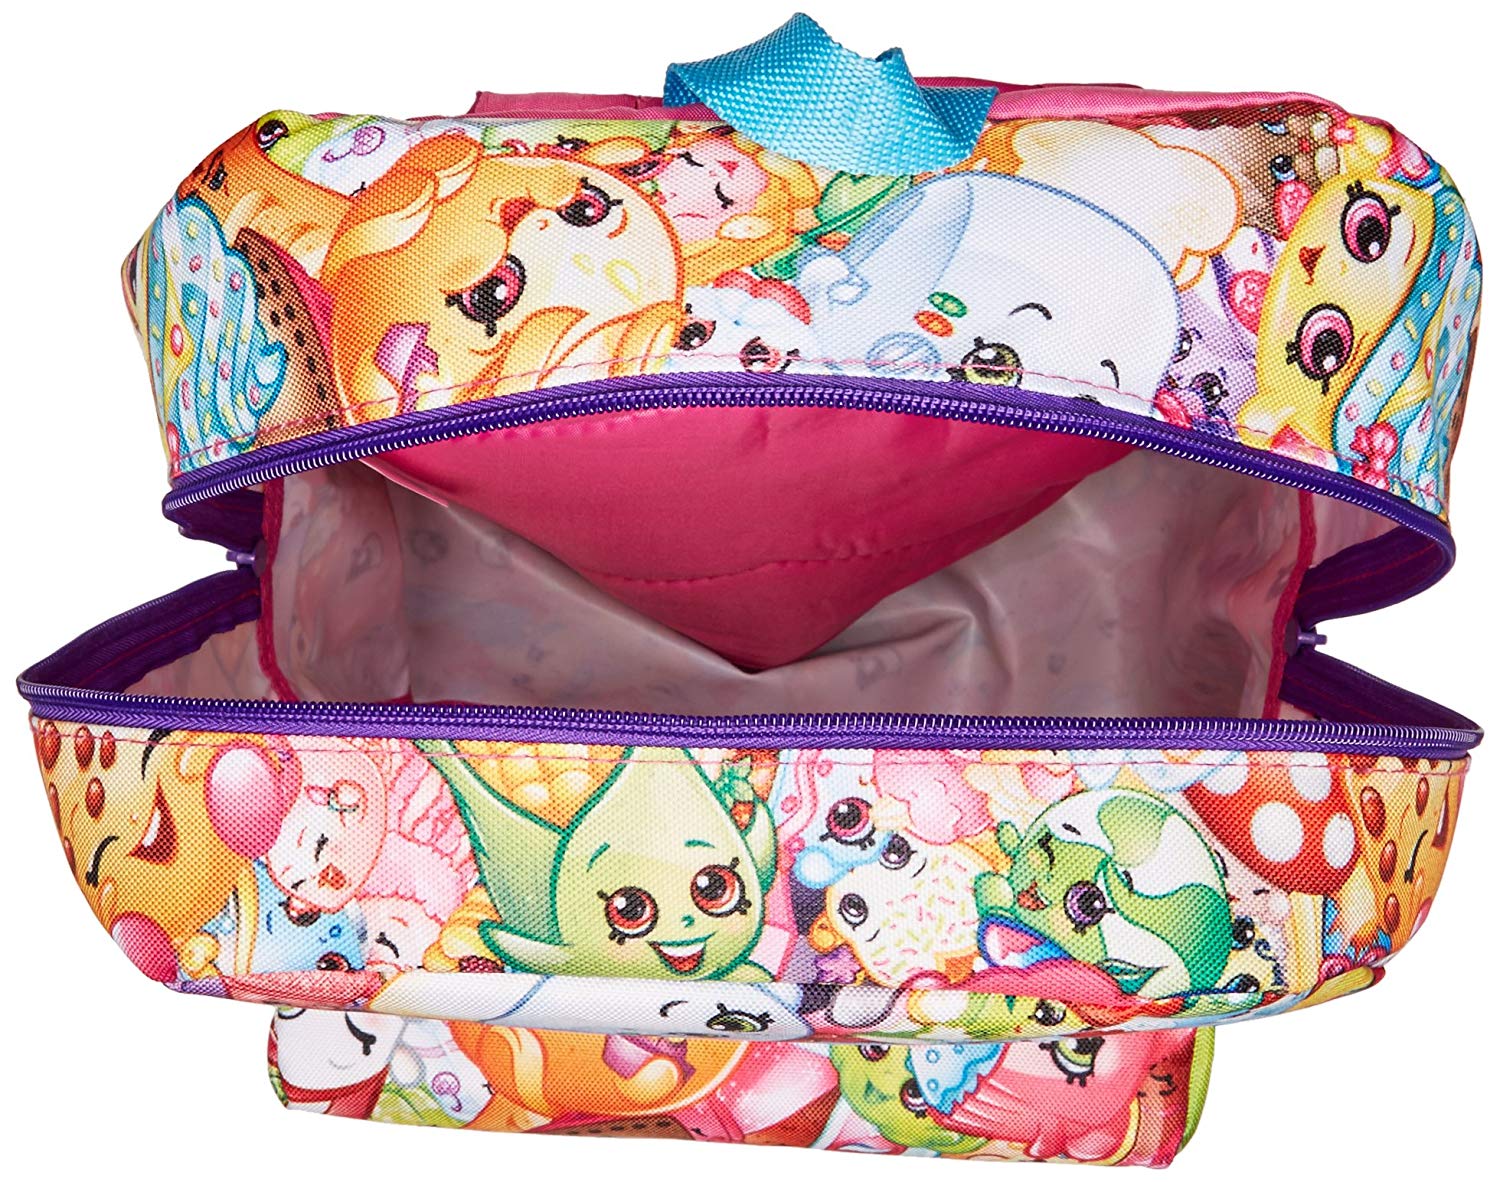 Shopkins Little Girls Print Backpack, Multi, One Size SY30713 - image 2 of 3